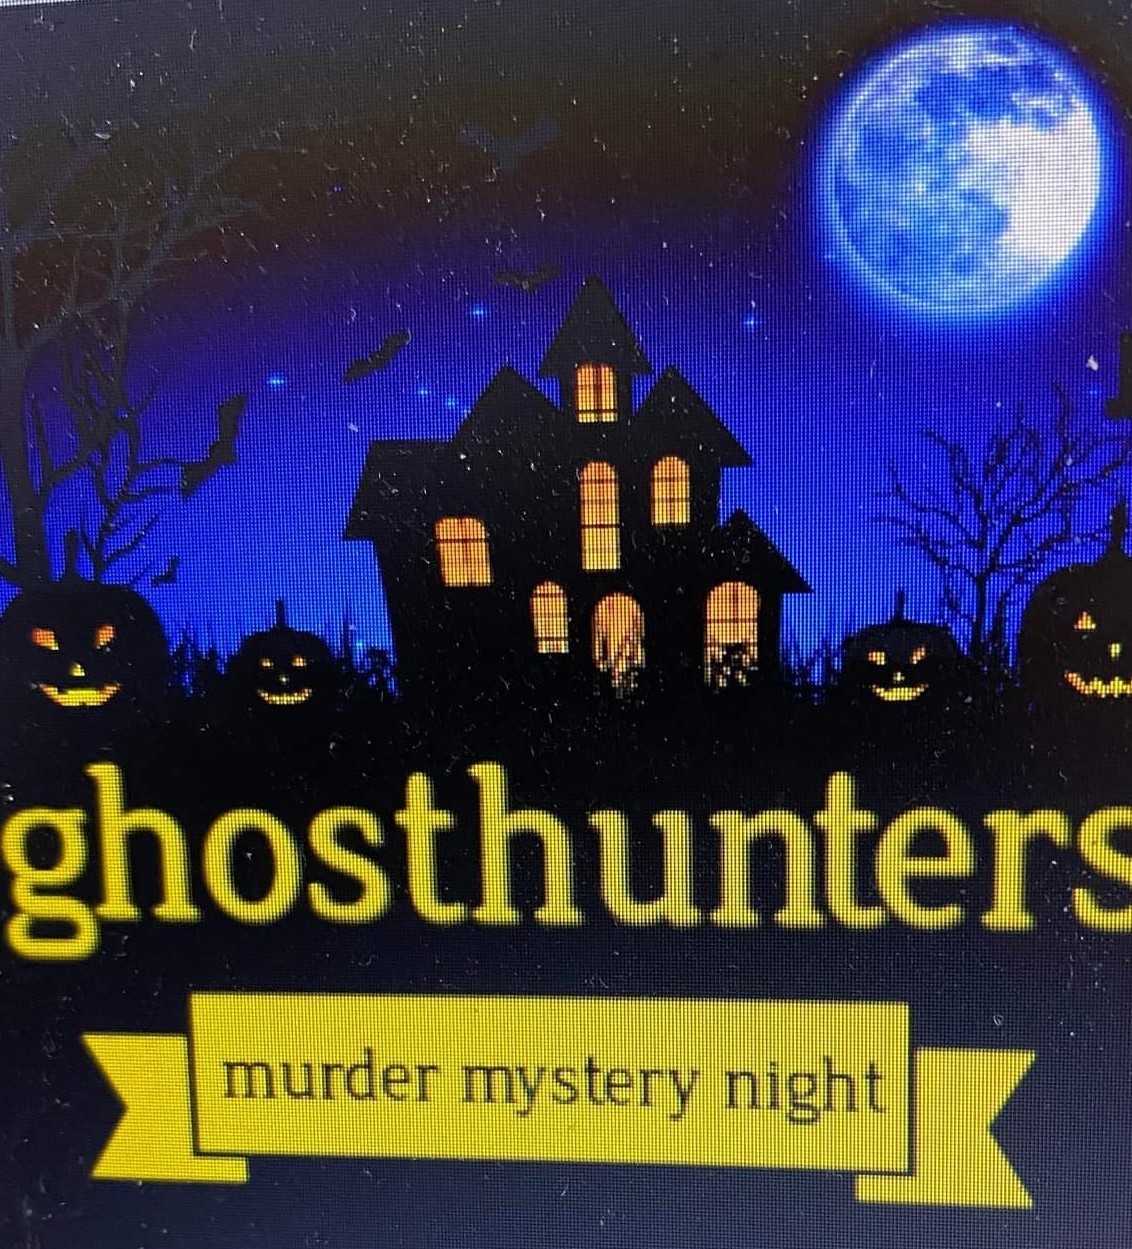 MURDER IN MIND PRESENTS Ghosthunters on oct. 29, 19:00@The Boat and Railway - Buy tickets and Get information on Murder in Mind 